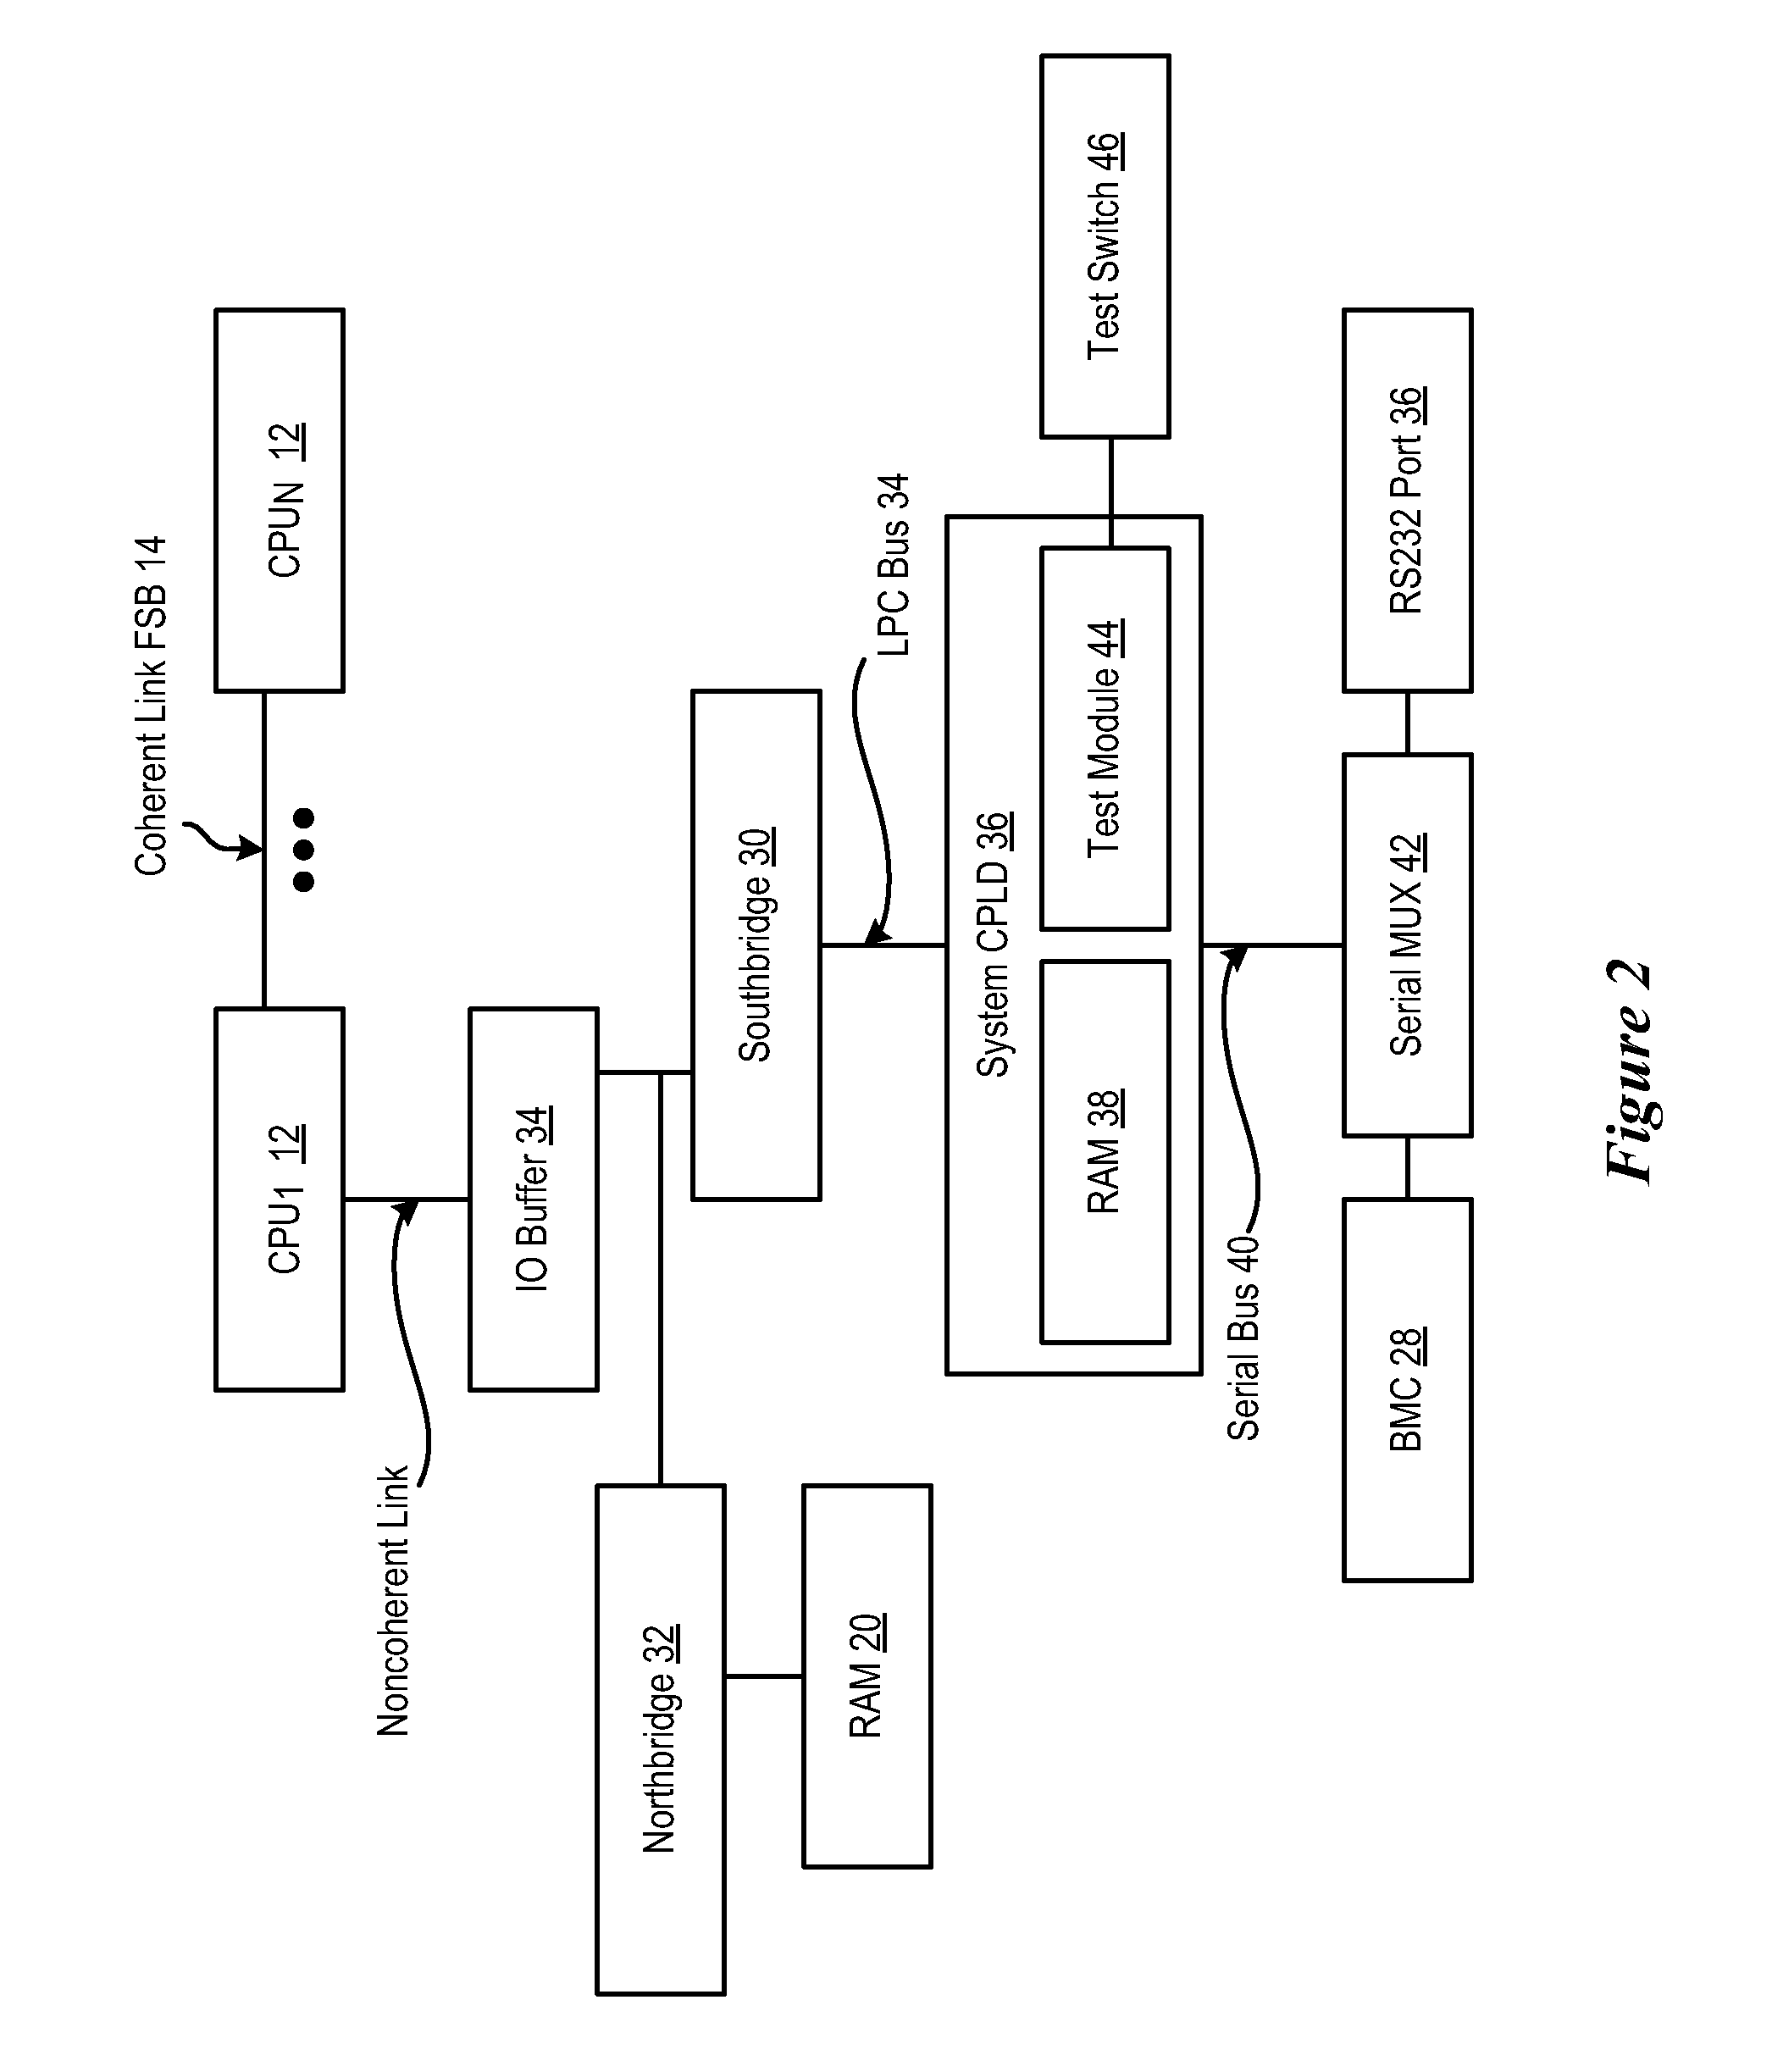 System and method for analyzing CPU performance from a serial link front side bus